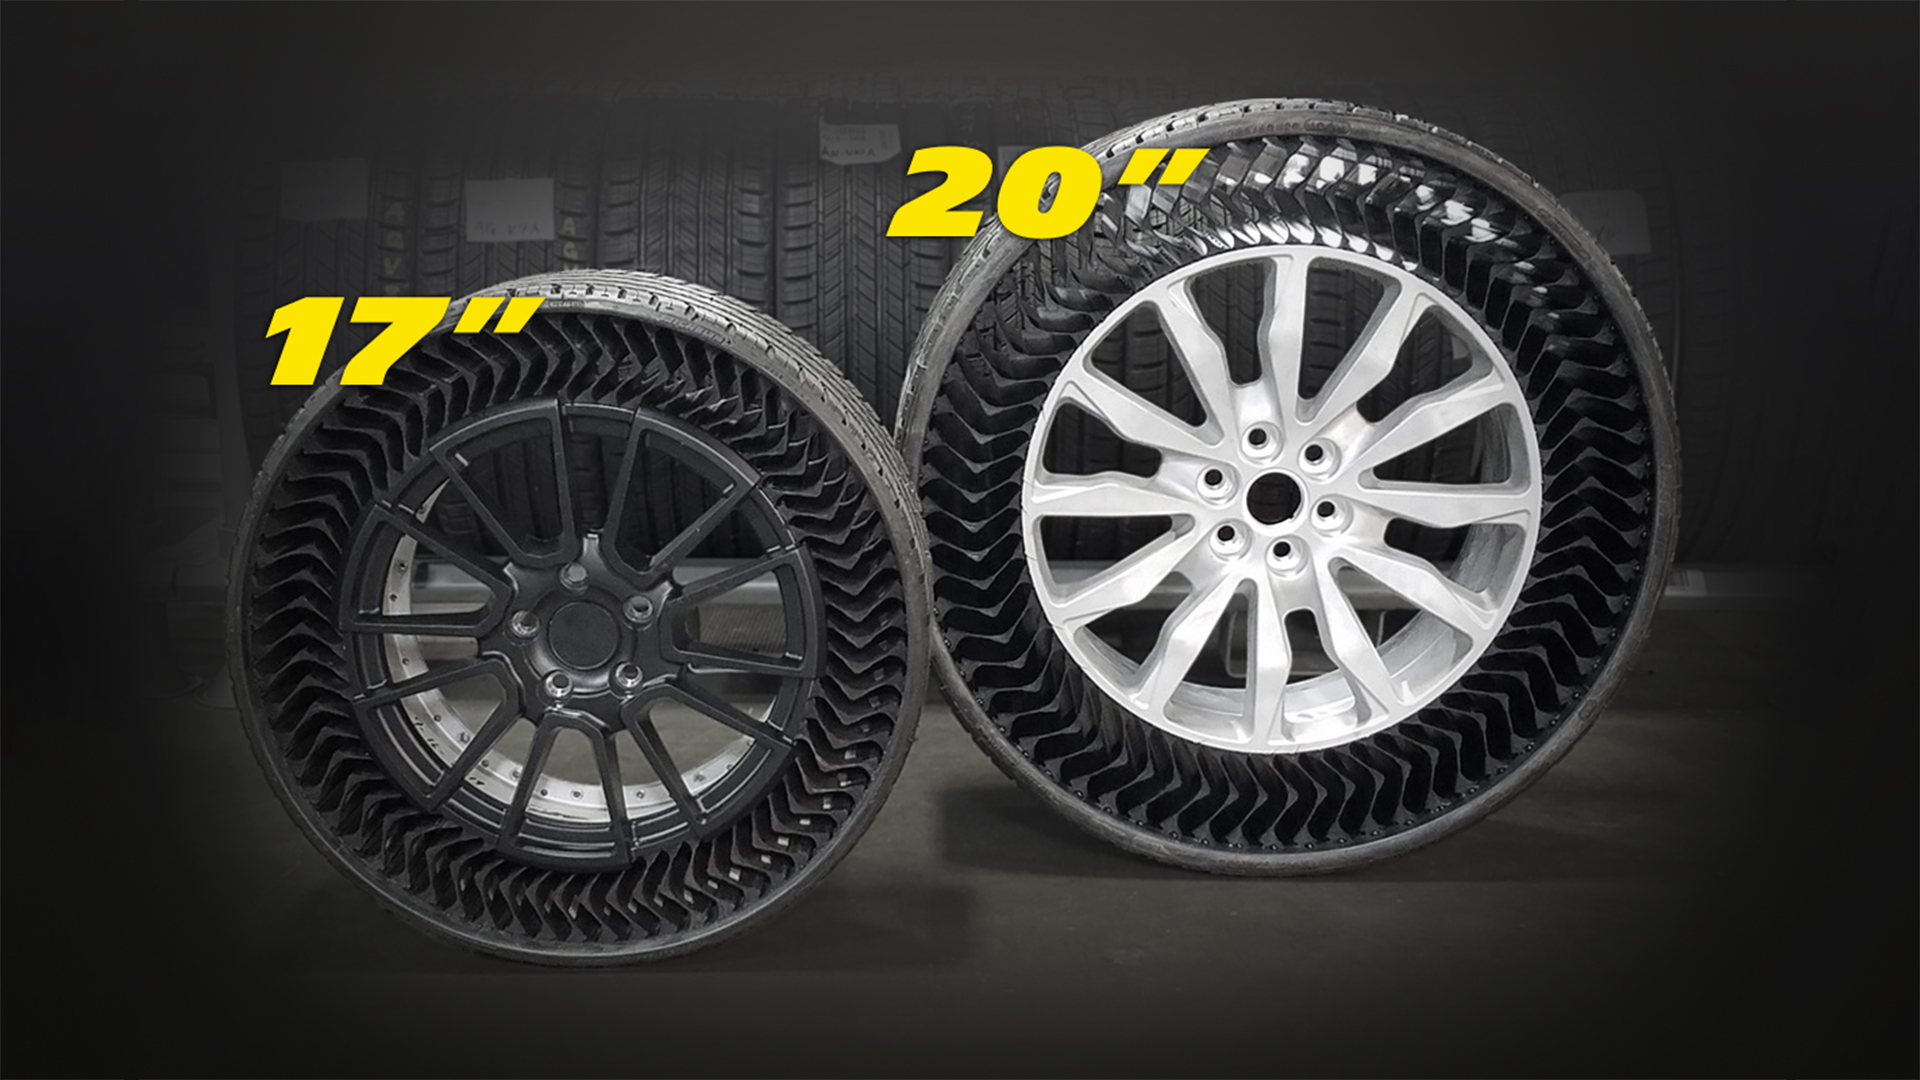 Michelin Has Tested Its Uptis Airless Tires at 130 MPH, and Results Are Positive